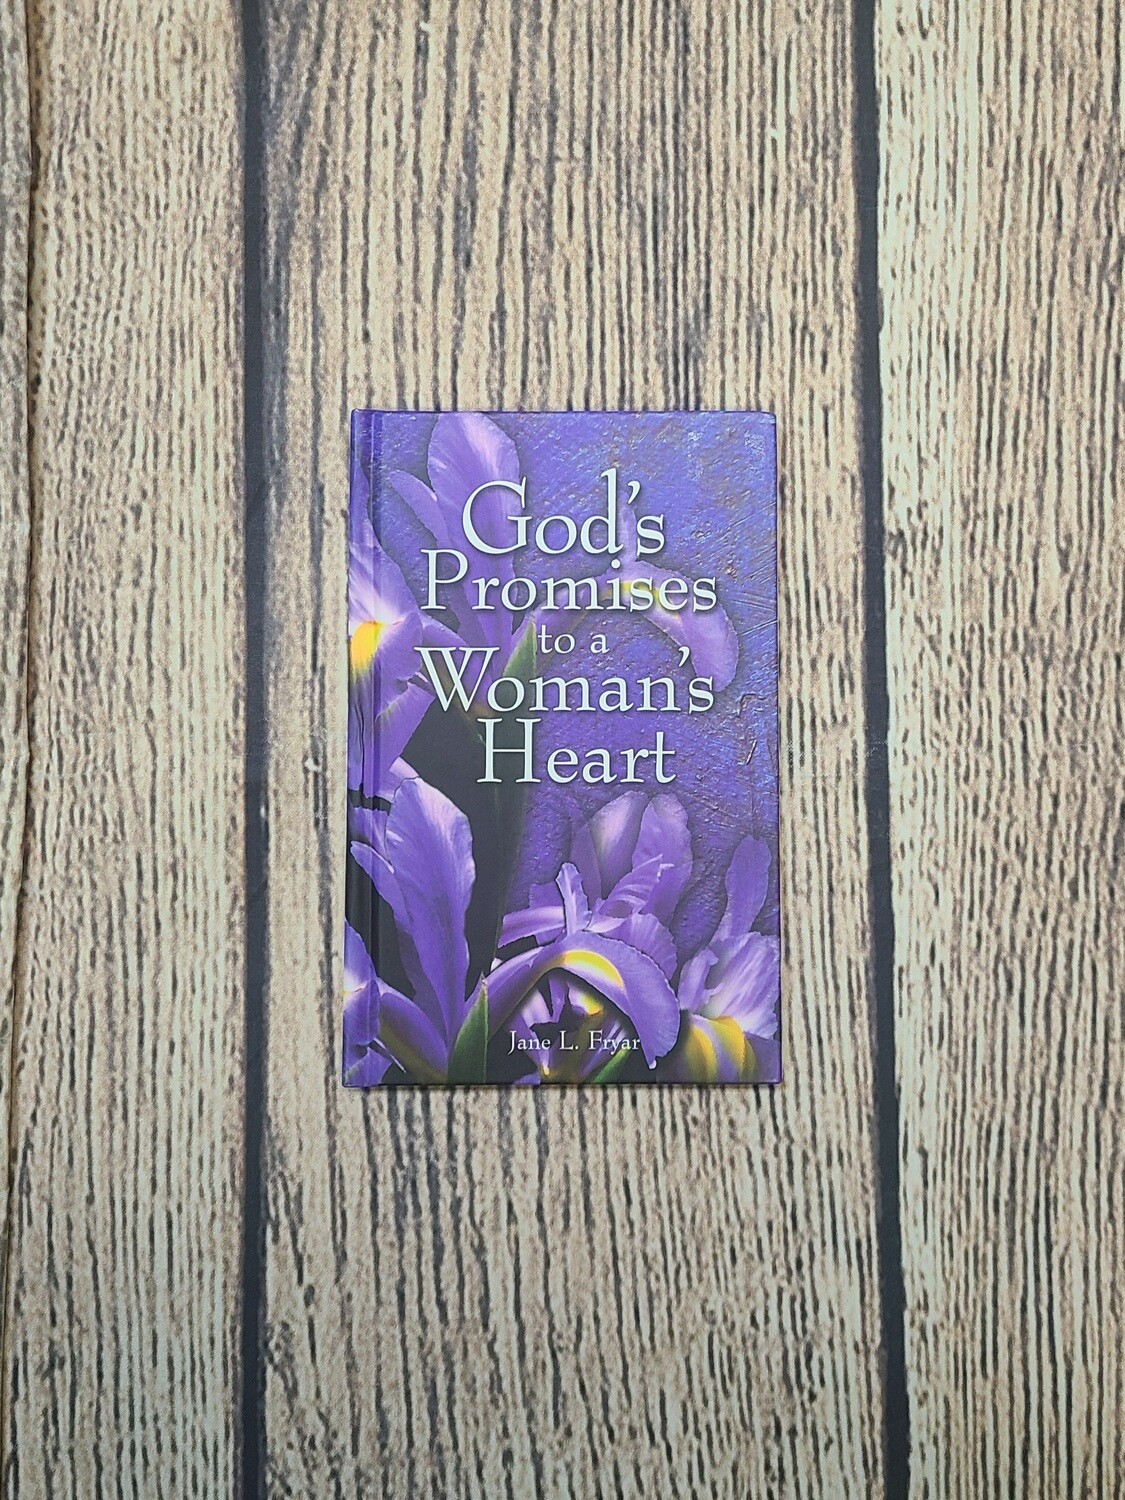 God's Promises to a Woman's Heart by Jane L. Fryar